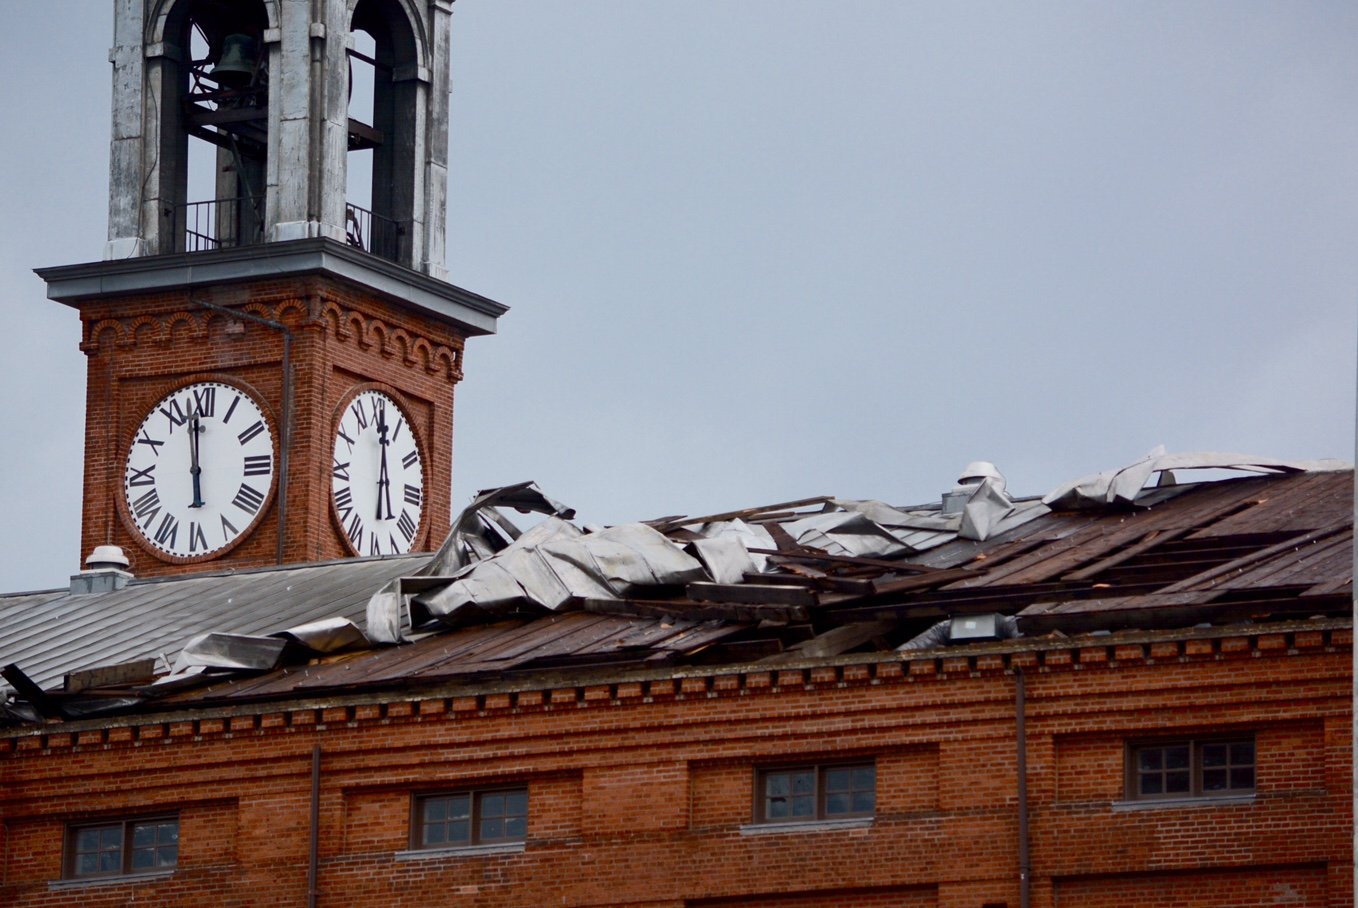 Roof damage to St. Aloysius Church in D.C. (WTOP/Dave Dildine)